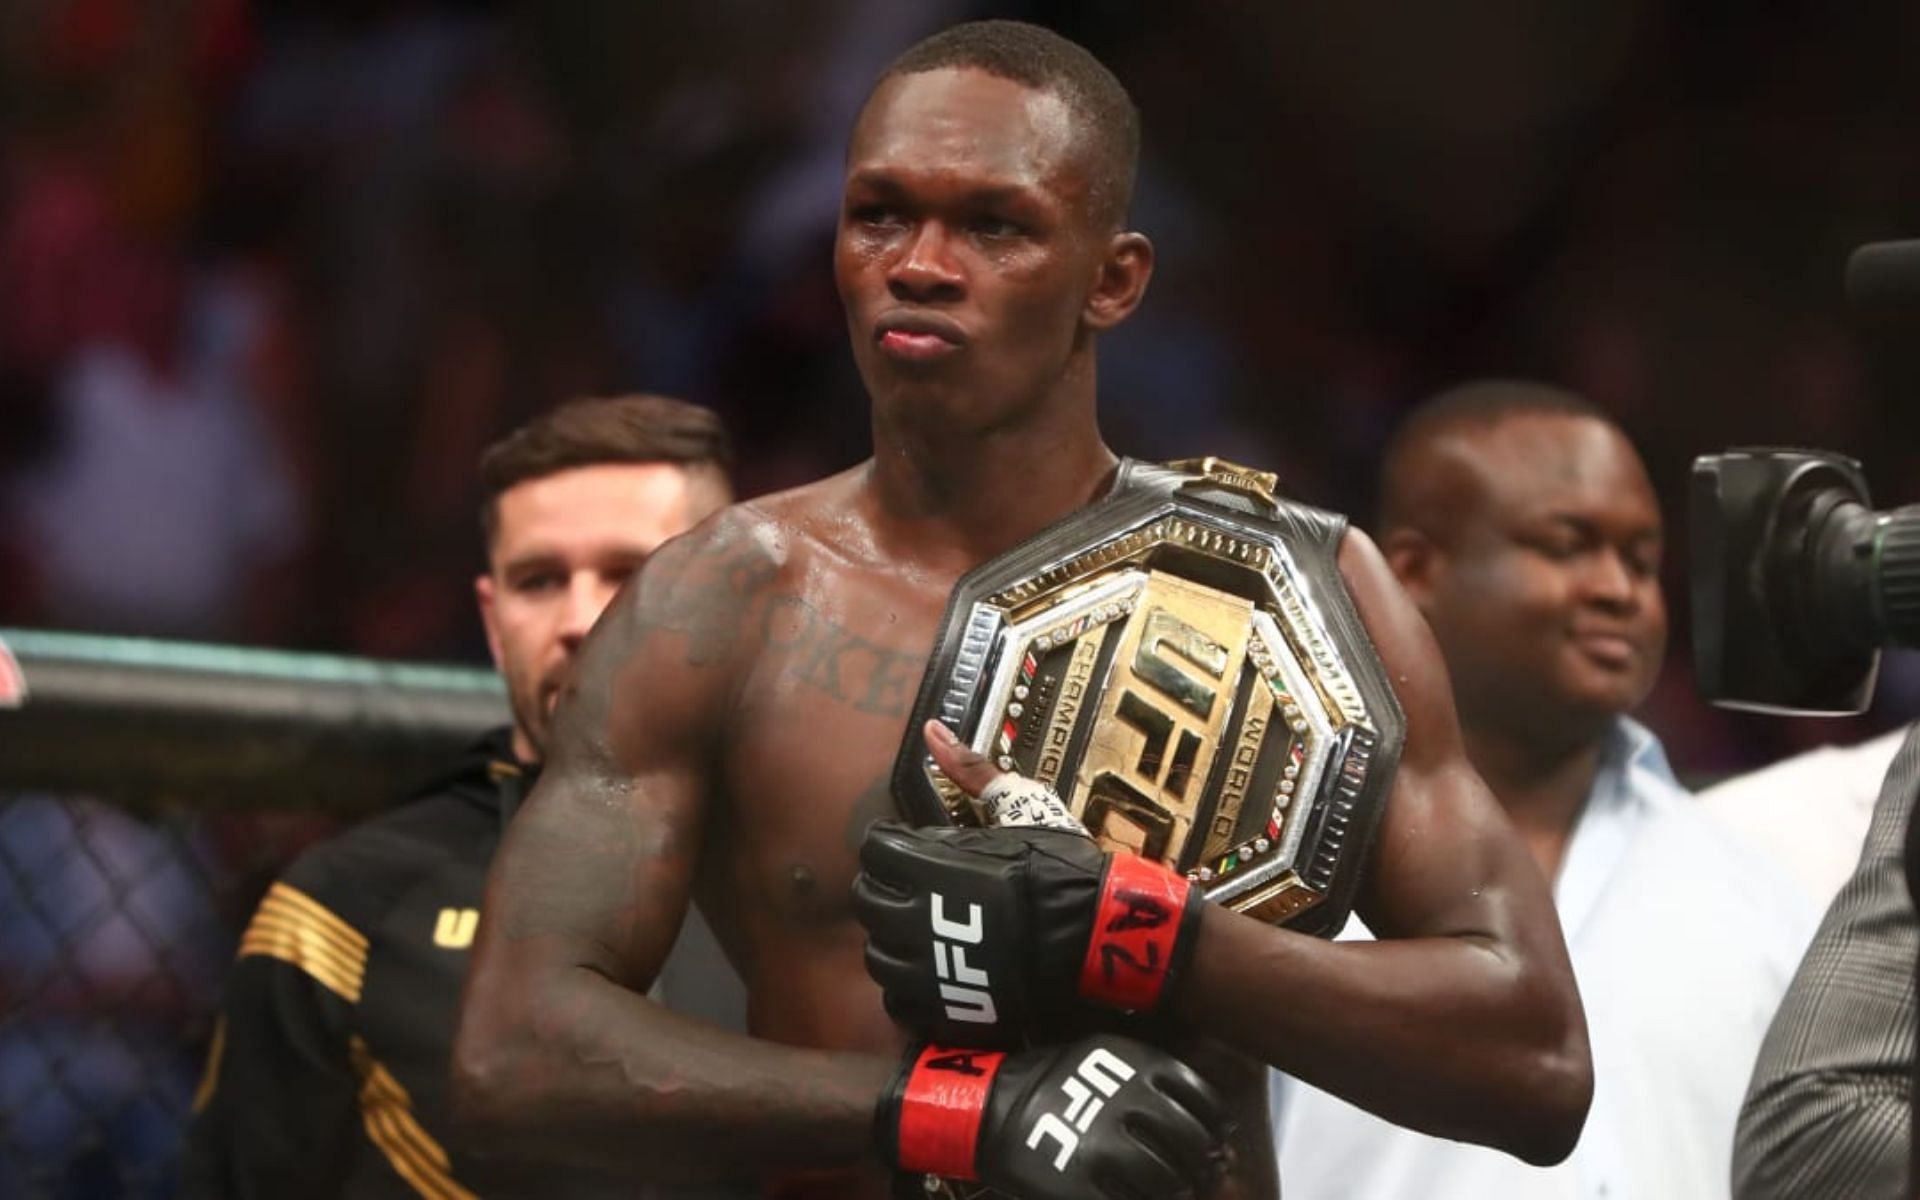 Following his win over Jared Cannonier, who is next for Israel Adesanya?